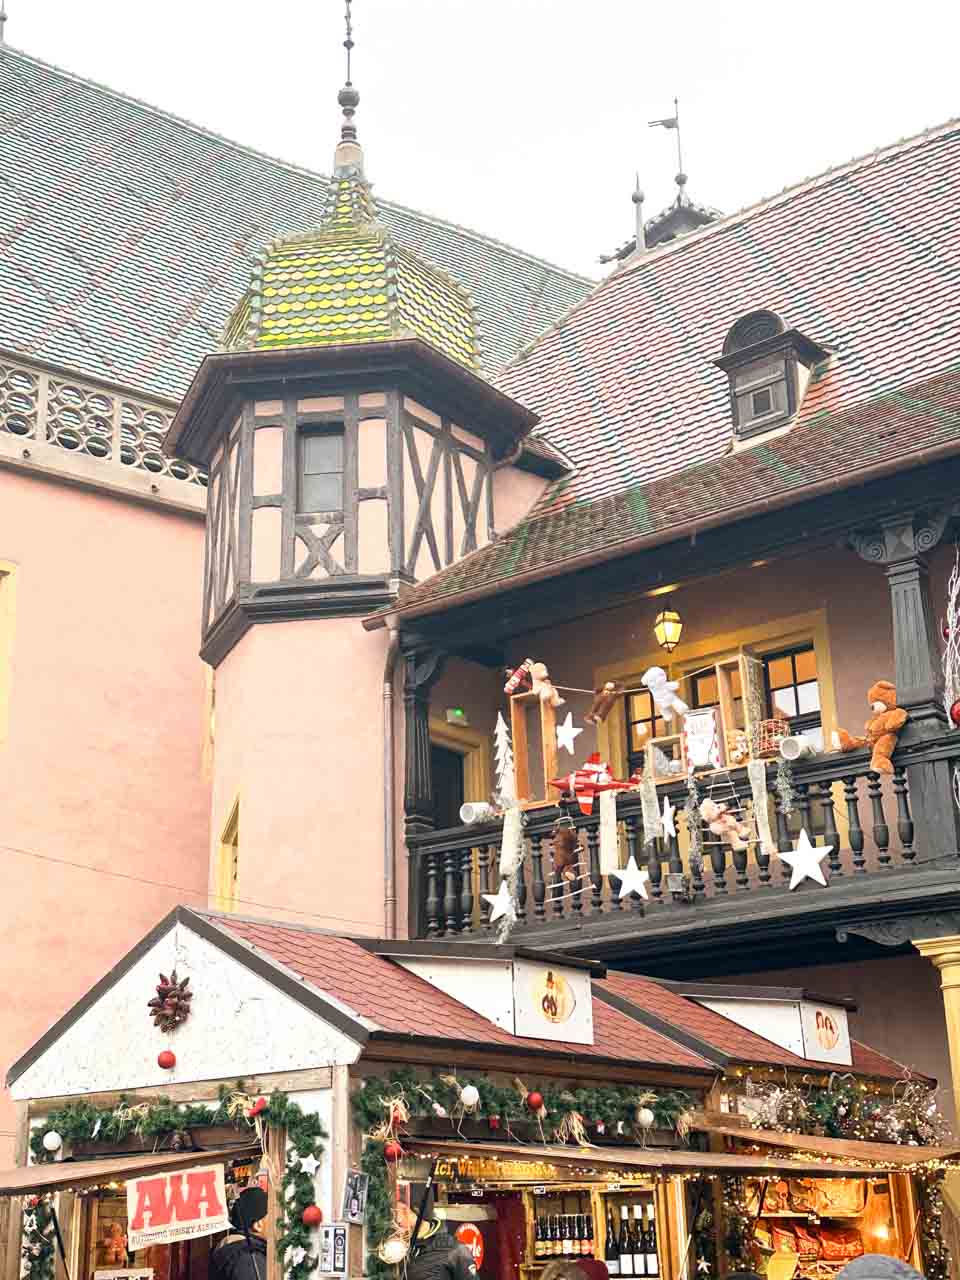 The Koïfhus building in Colmar, providing a picturesque backdrop to a Christmas market stall decked out in festive garlands and decorations